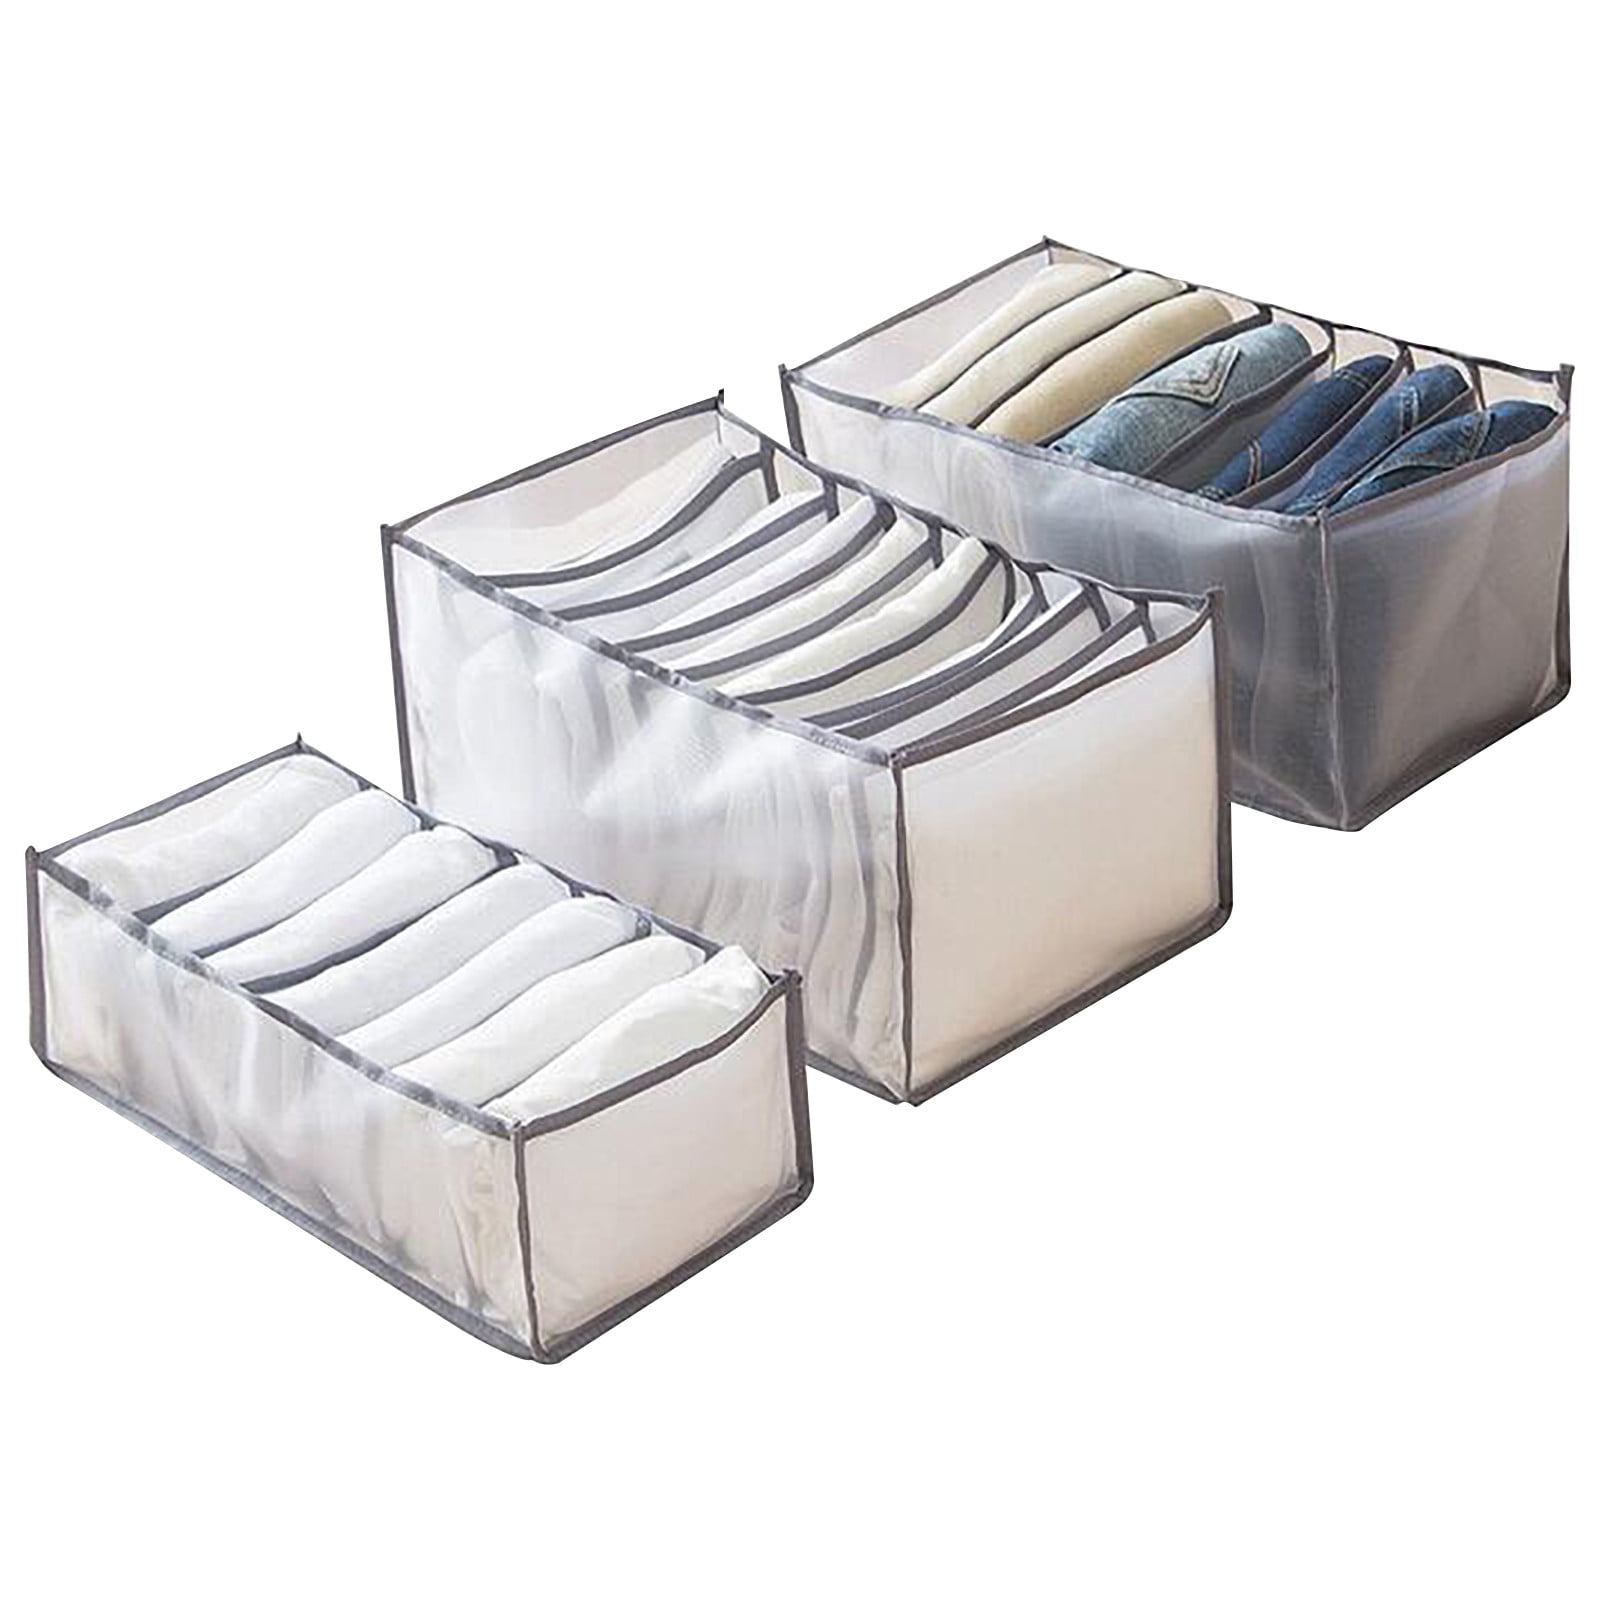 Clothes Compartment Mesh Storage Box Closet Drawer Divider Container Organizer 